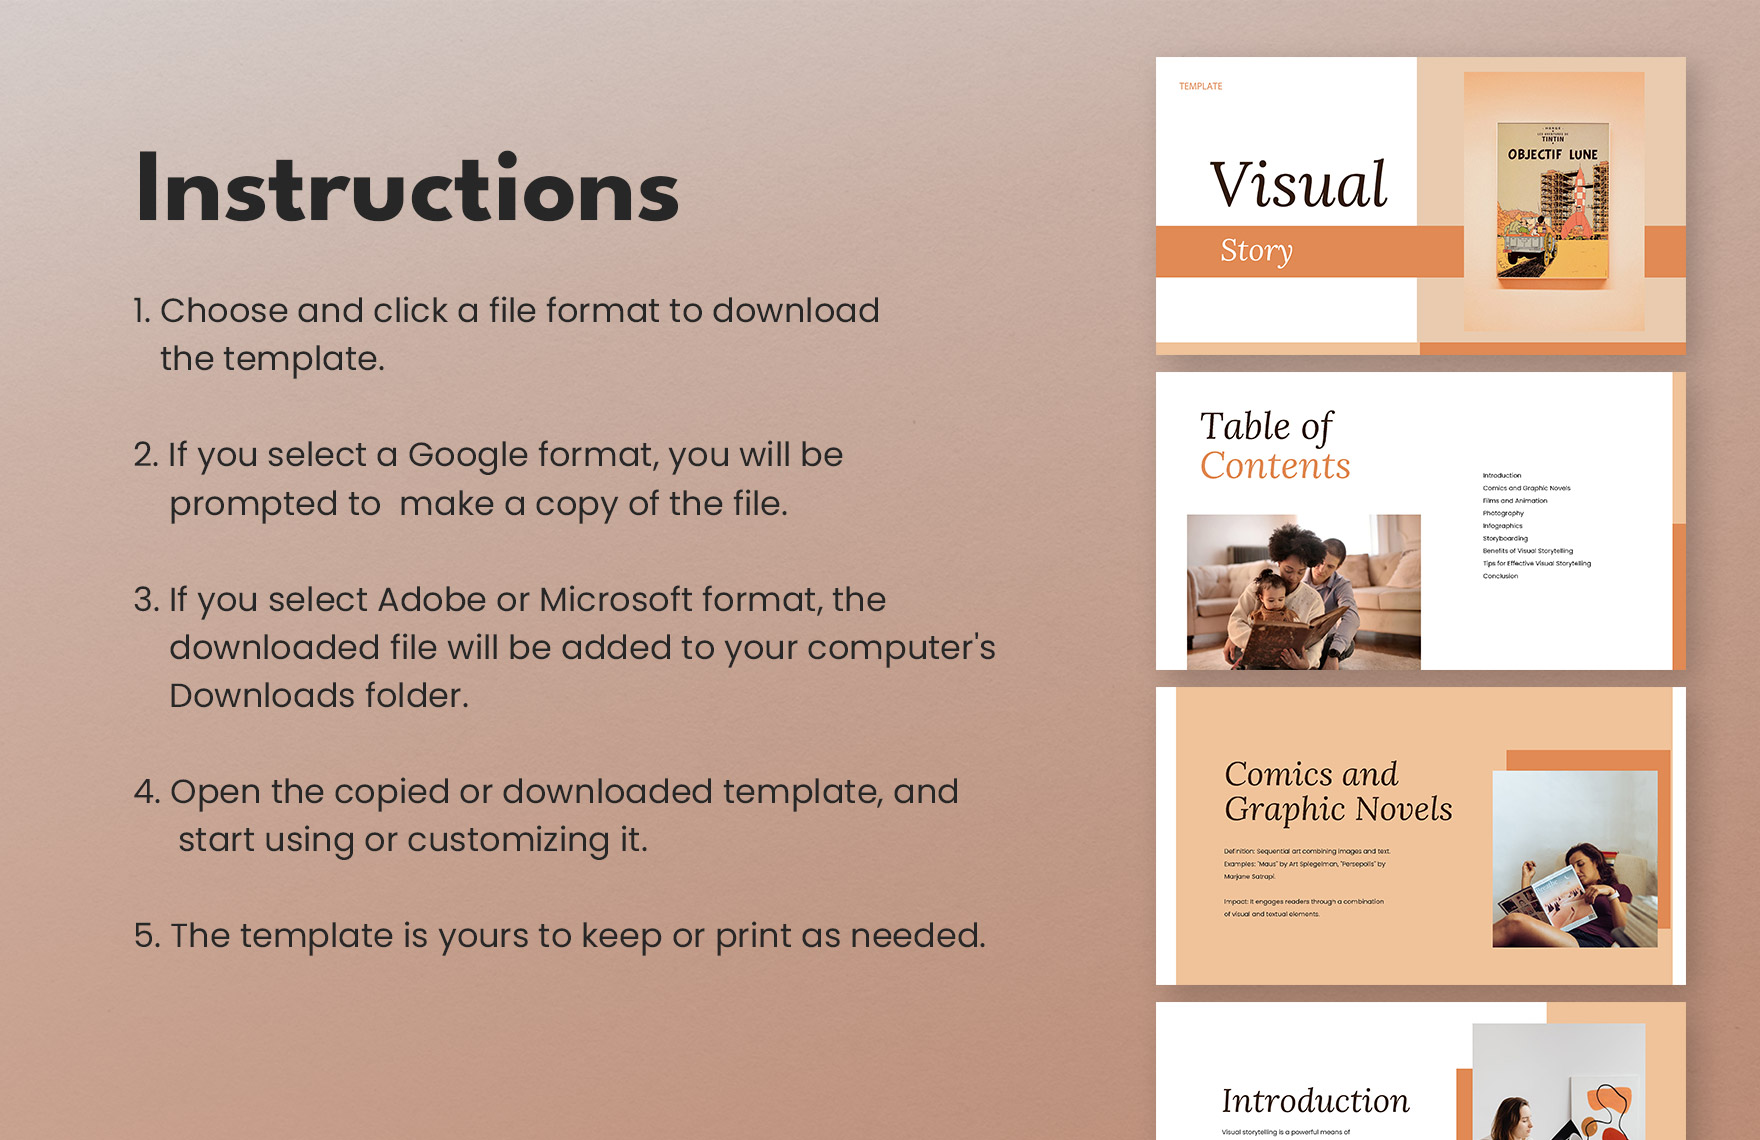 Visual Story Template